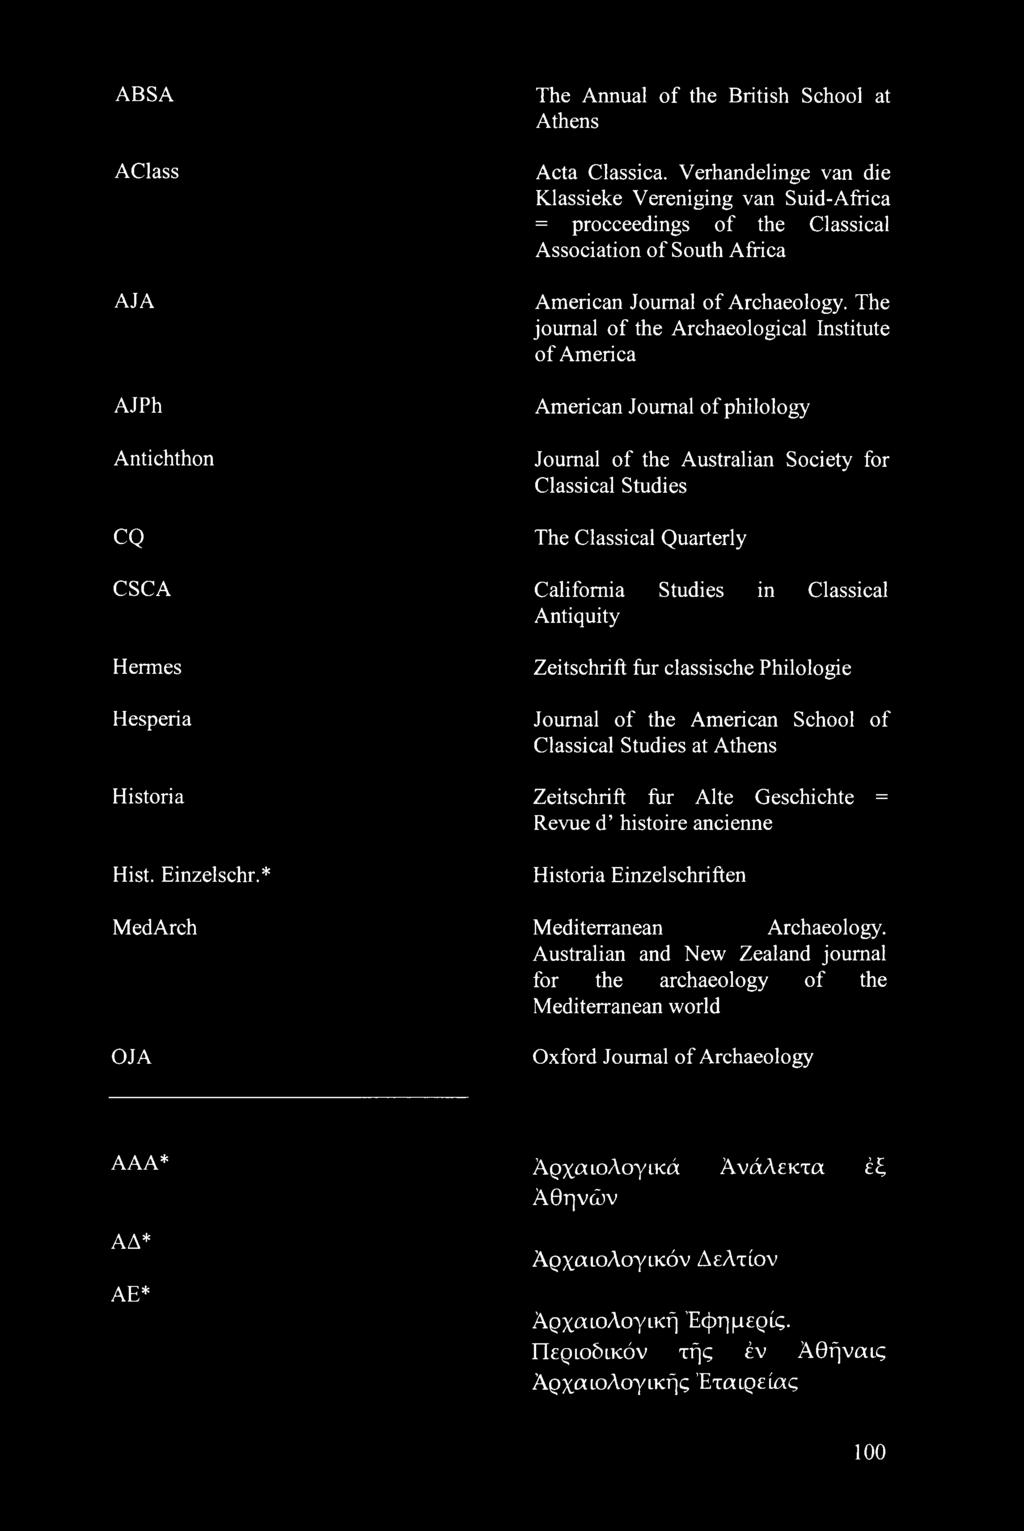 The journal of the Archaeological Institute of America American Journal of philology Journal of the Australian Society for Classical Studies The Classical Quarterly California Studies in Classical